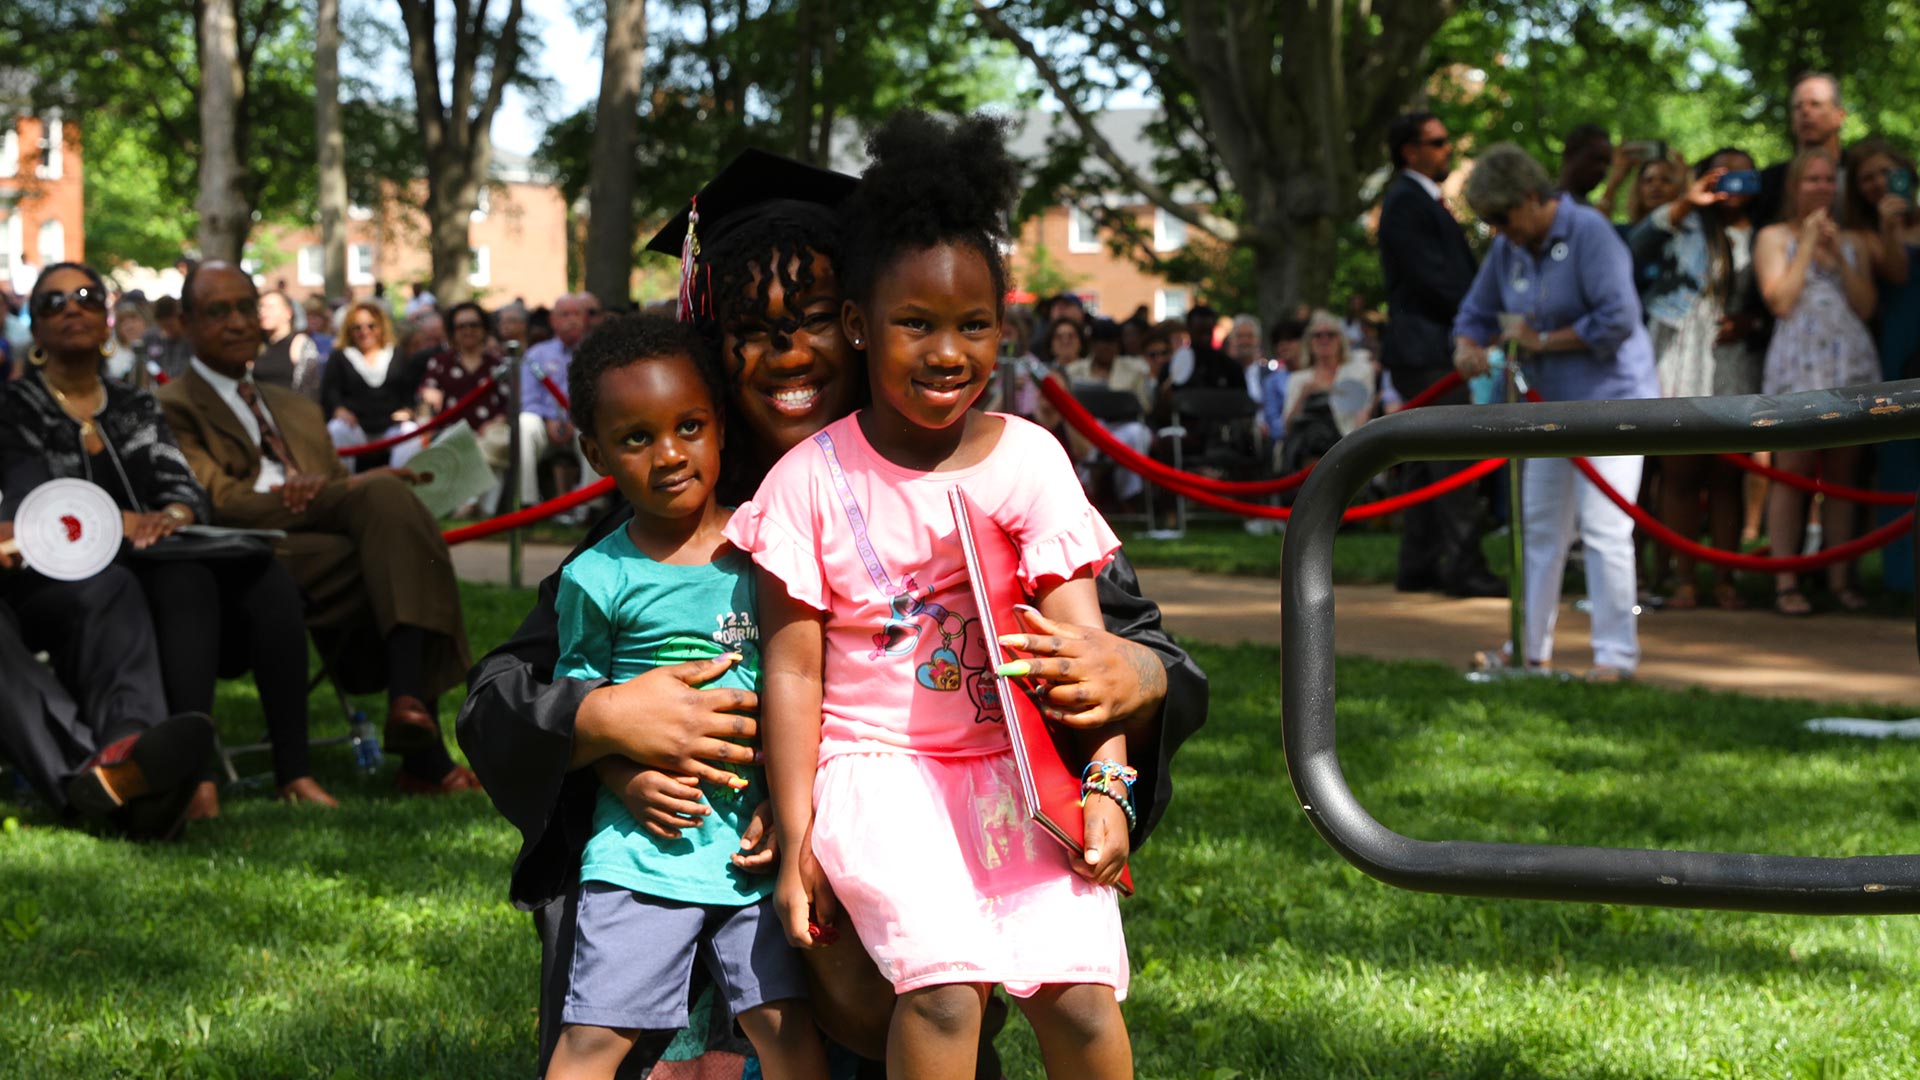 A student celebrates with small children after Commencement.